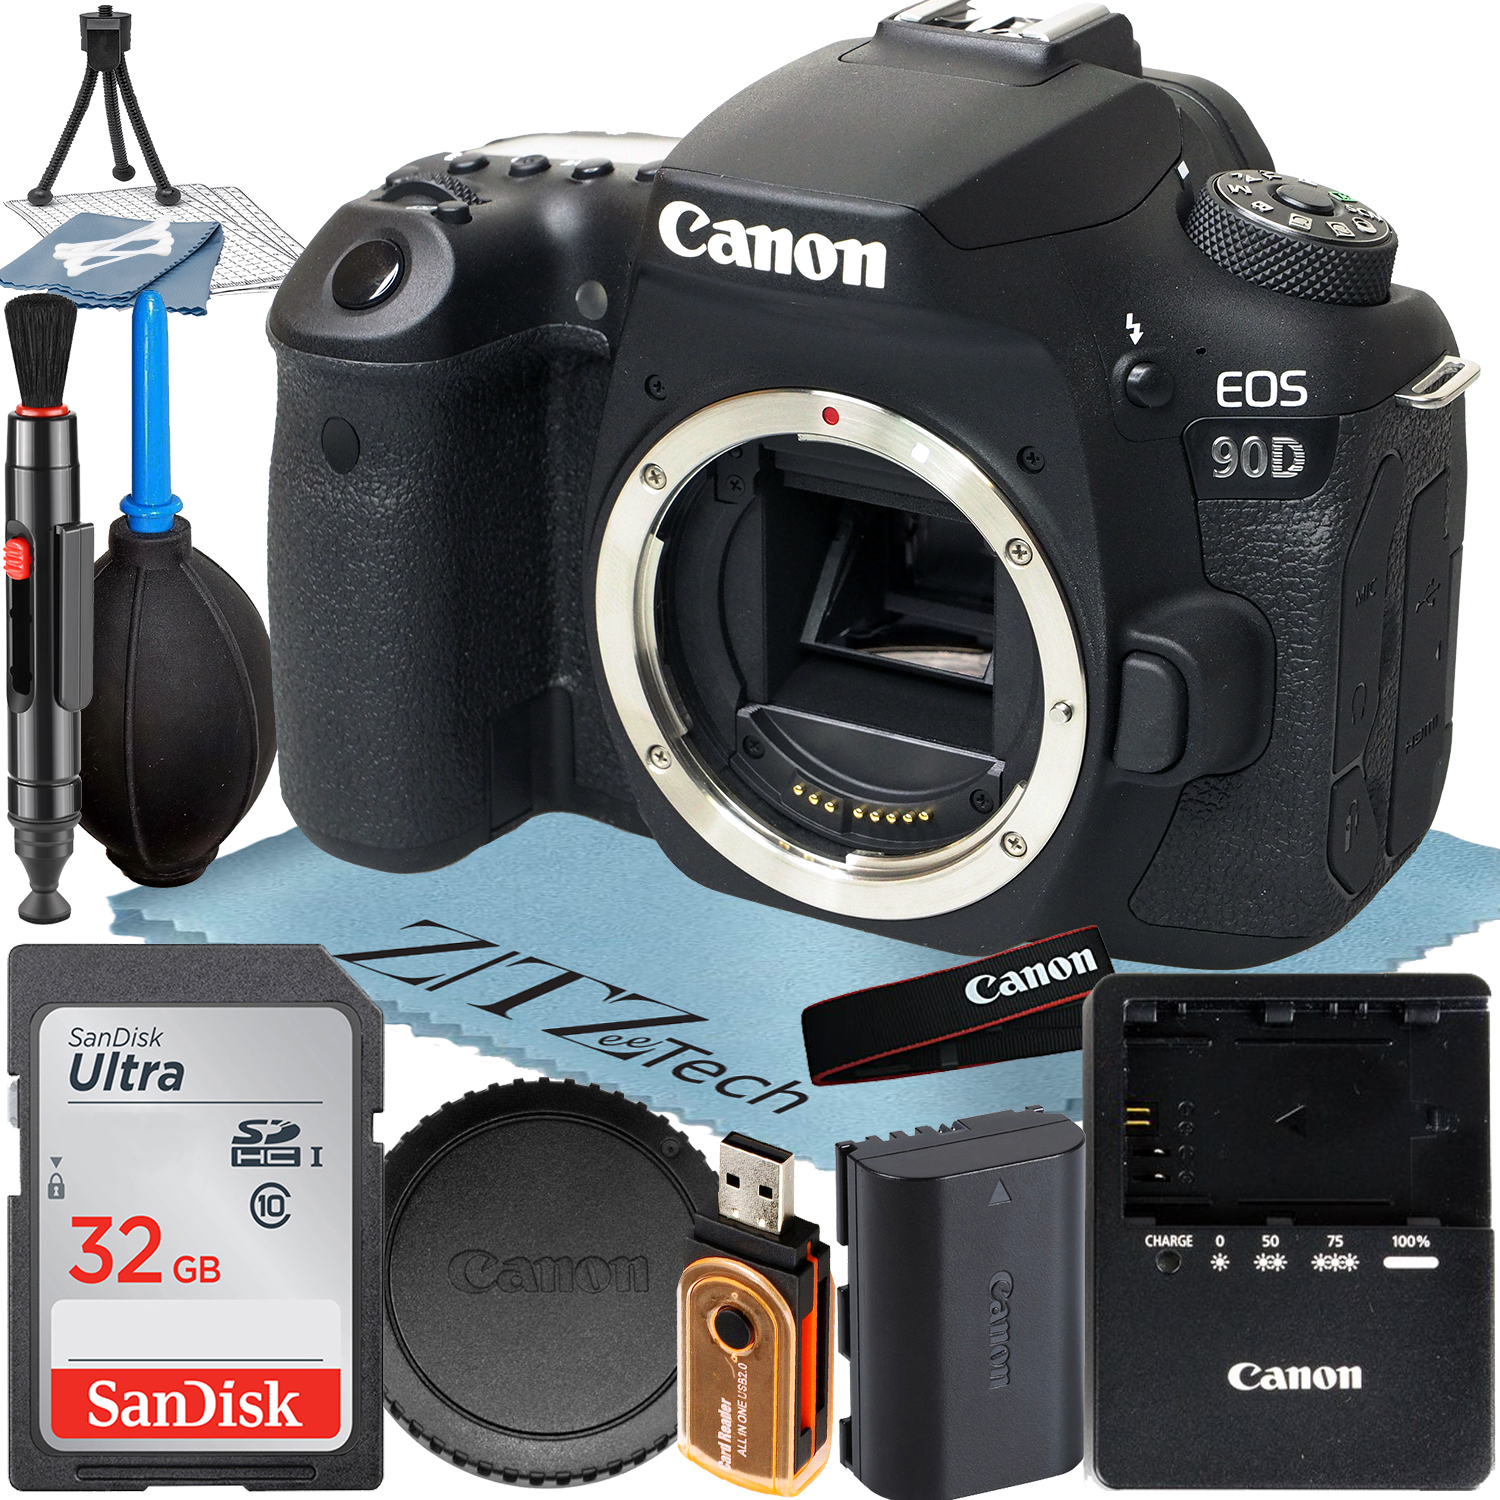 Canon EOS 90D DSLR Camera (Body Only) with 32.5MP CMOS Sensor + SanDisk 32GB Memory Card + ZeeTech Accessory Bundle